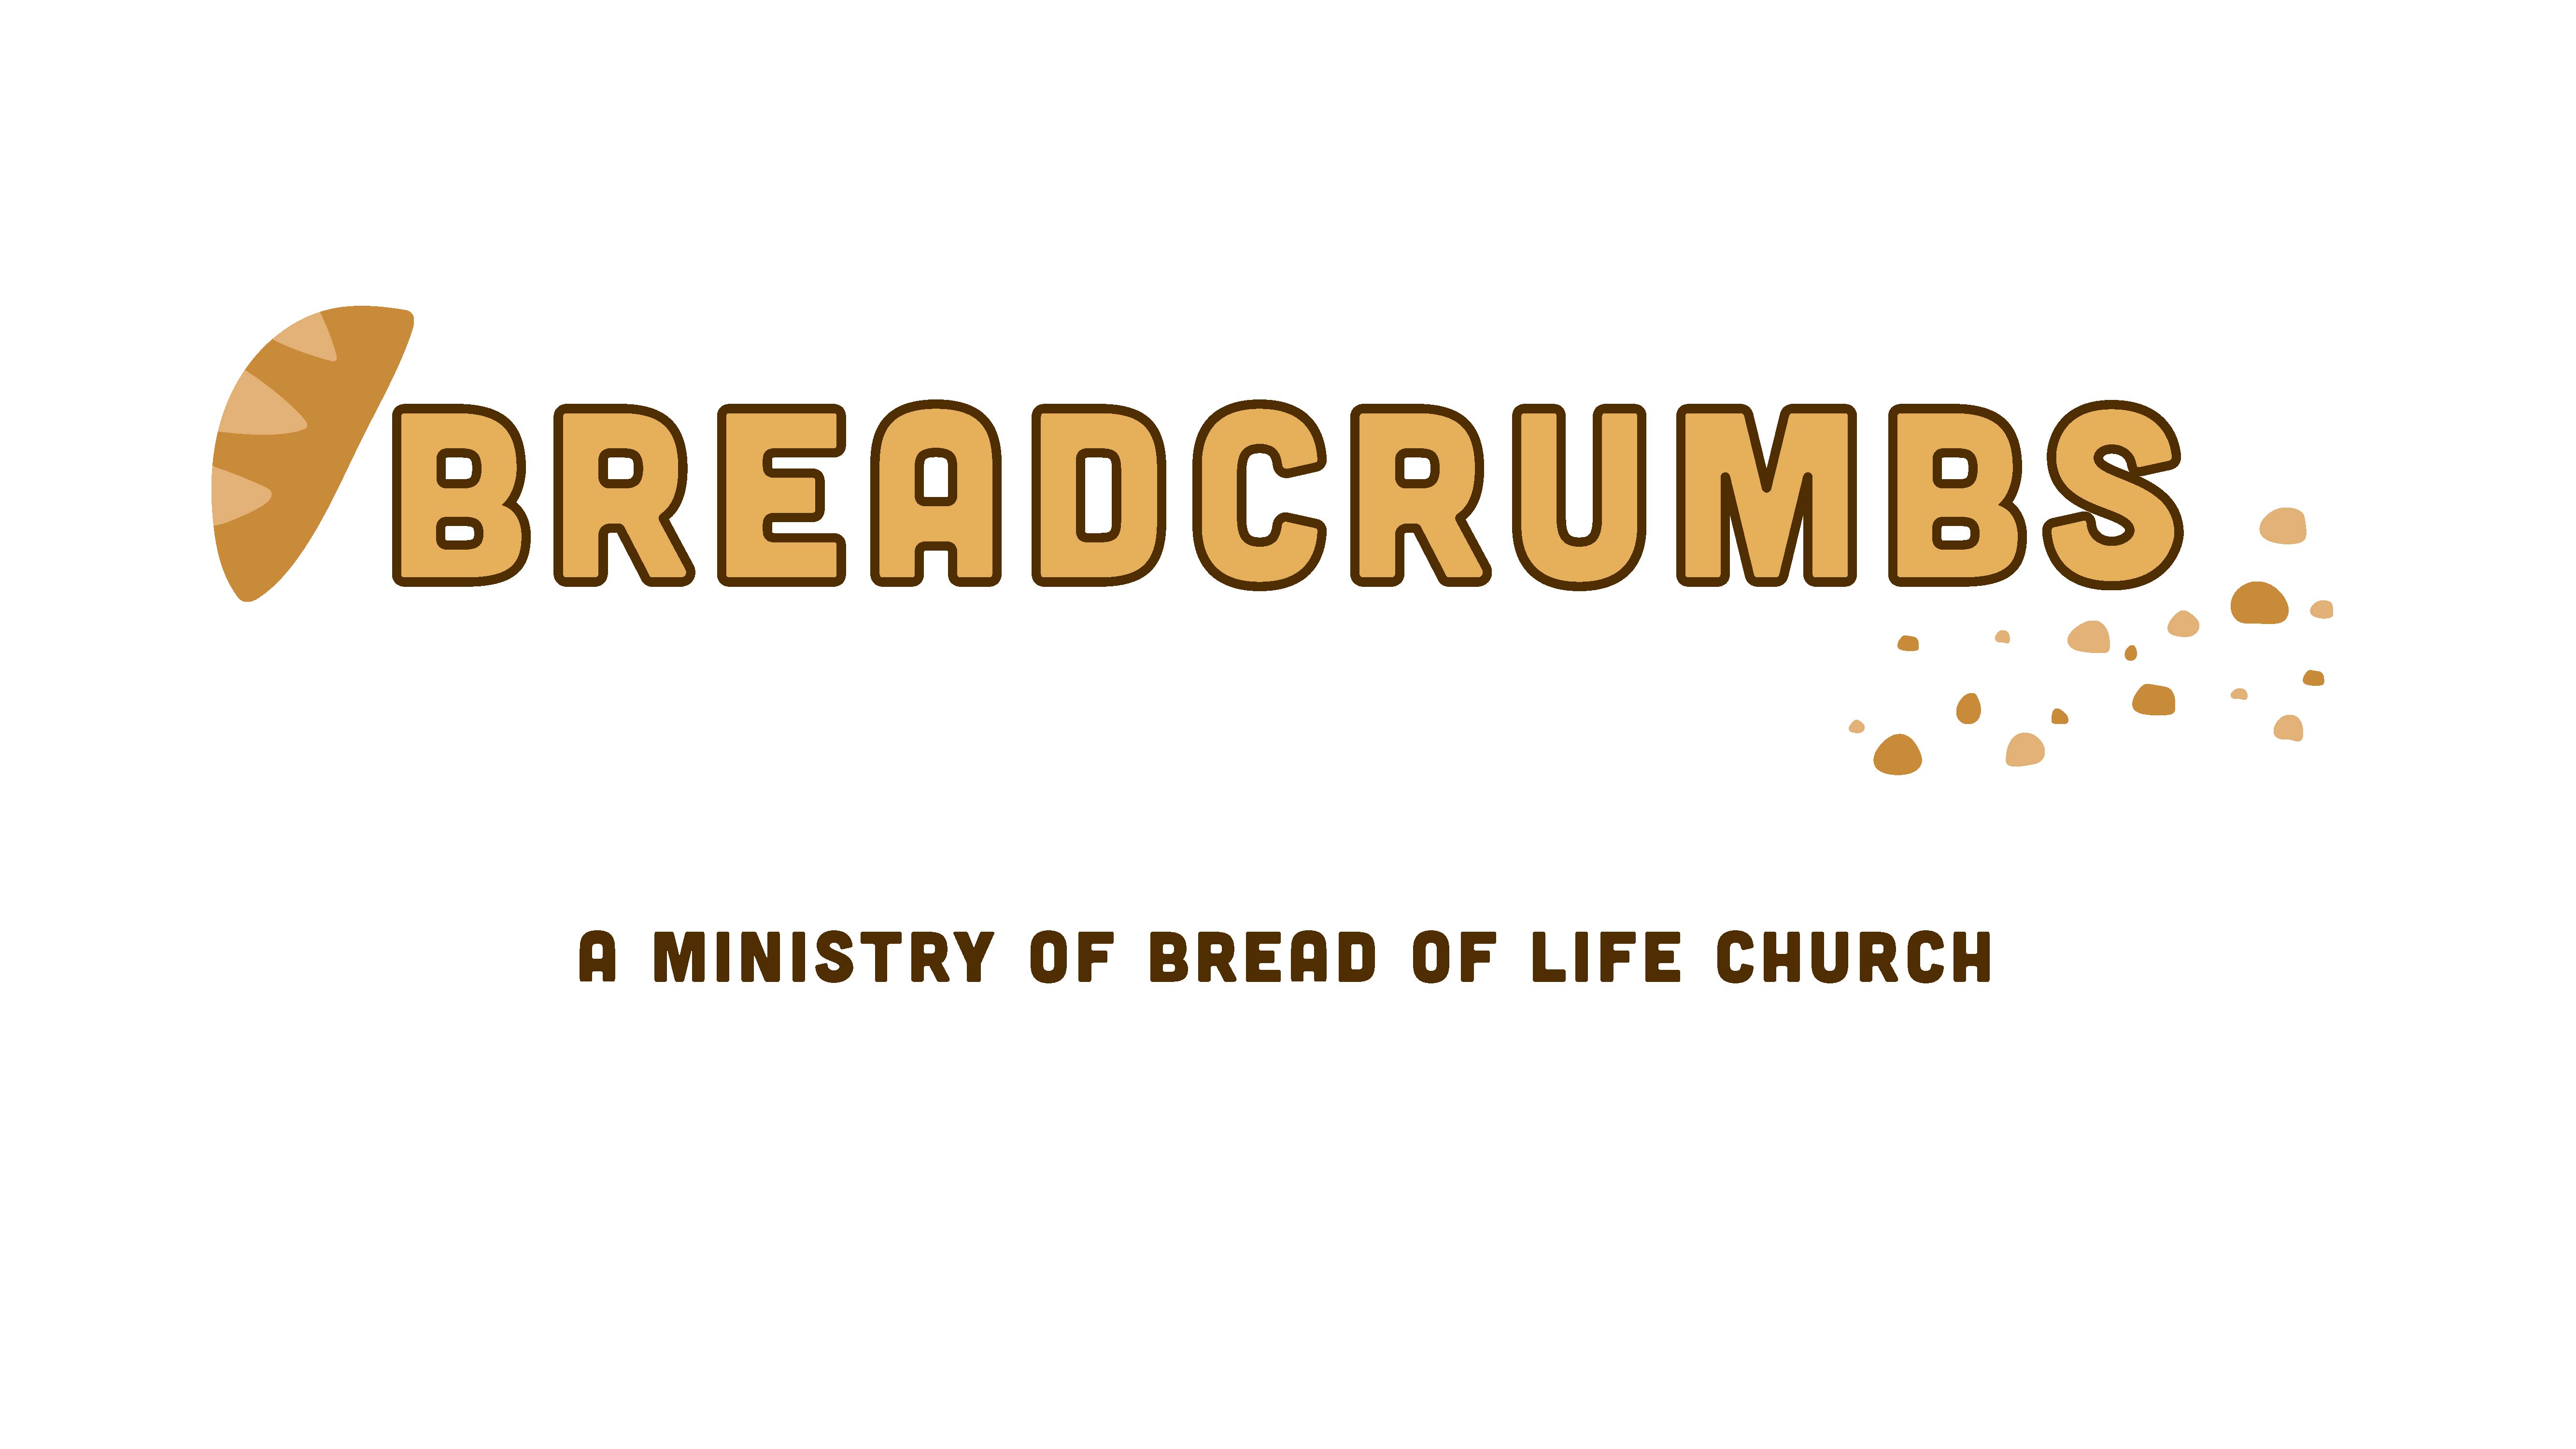 You are currently viewing Breadcrumbs in November